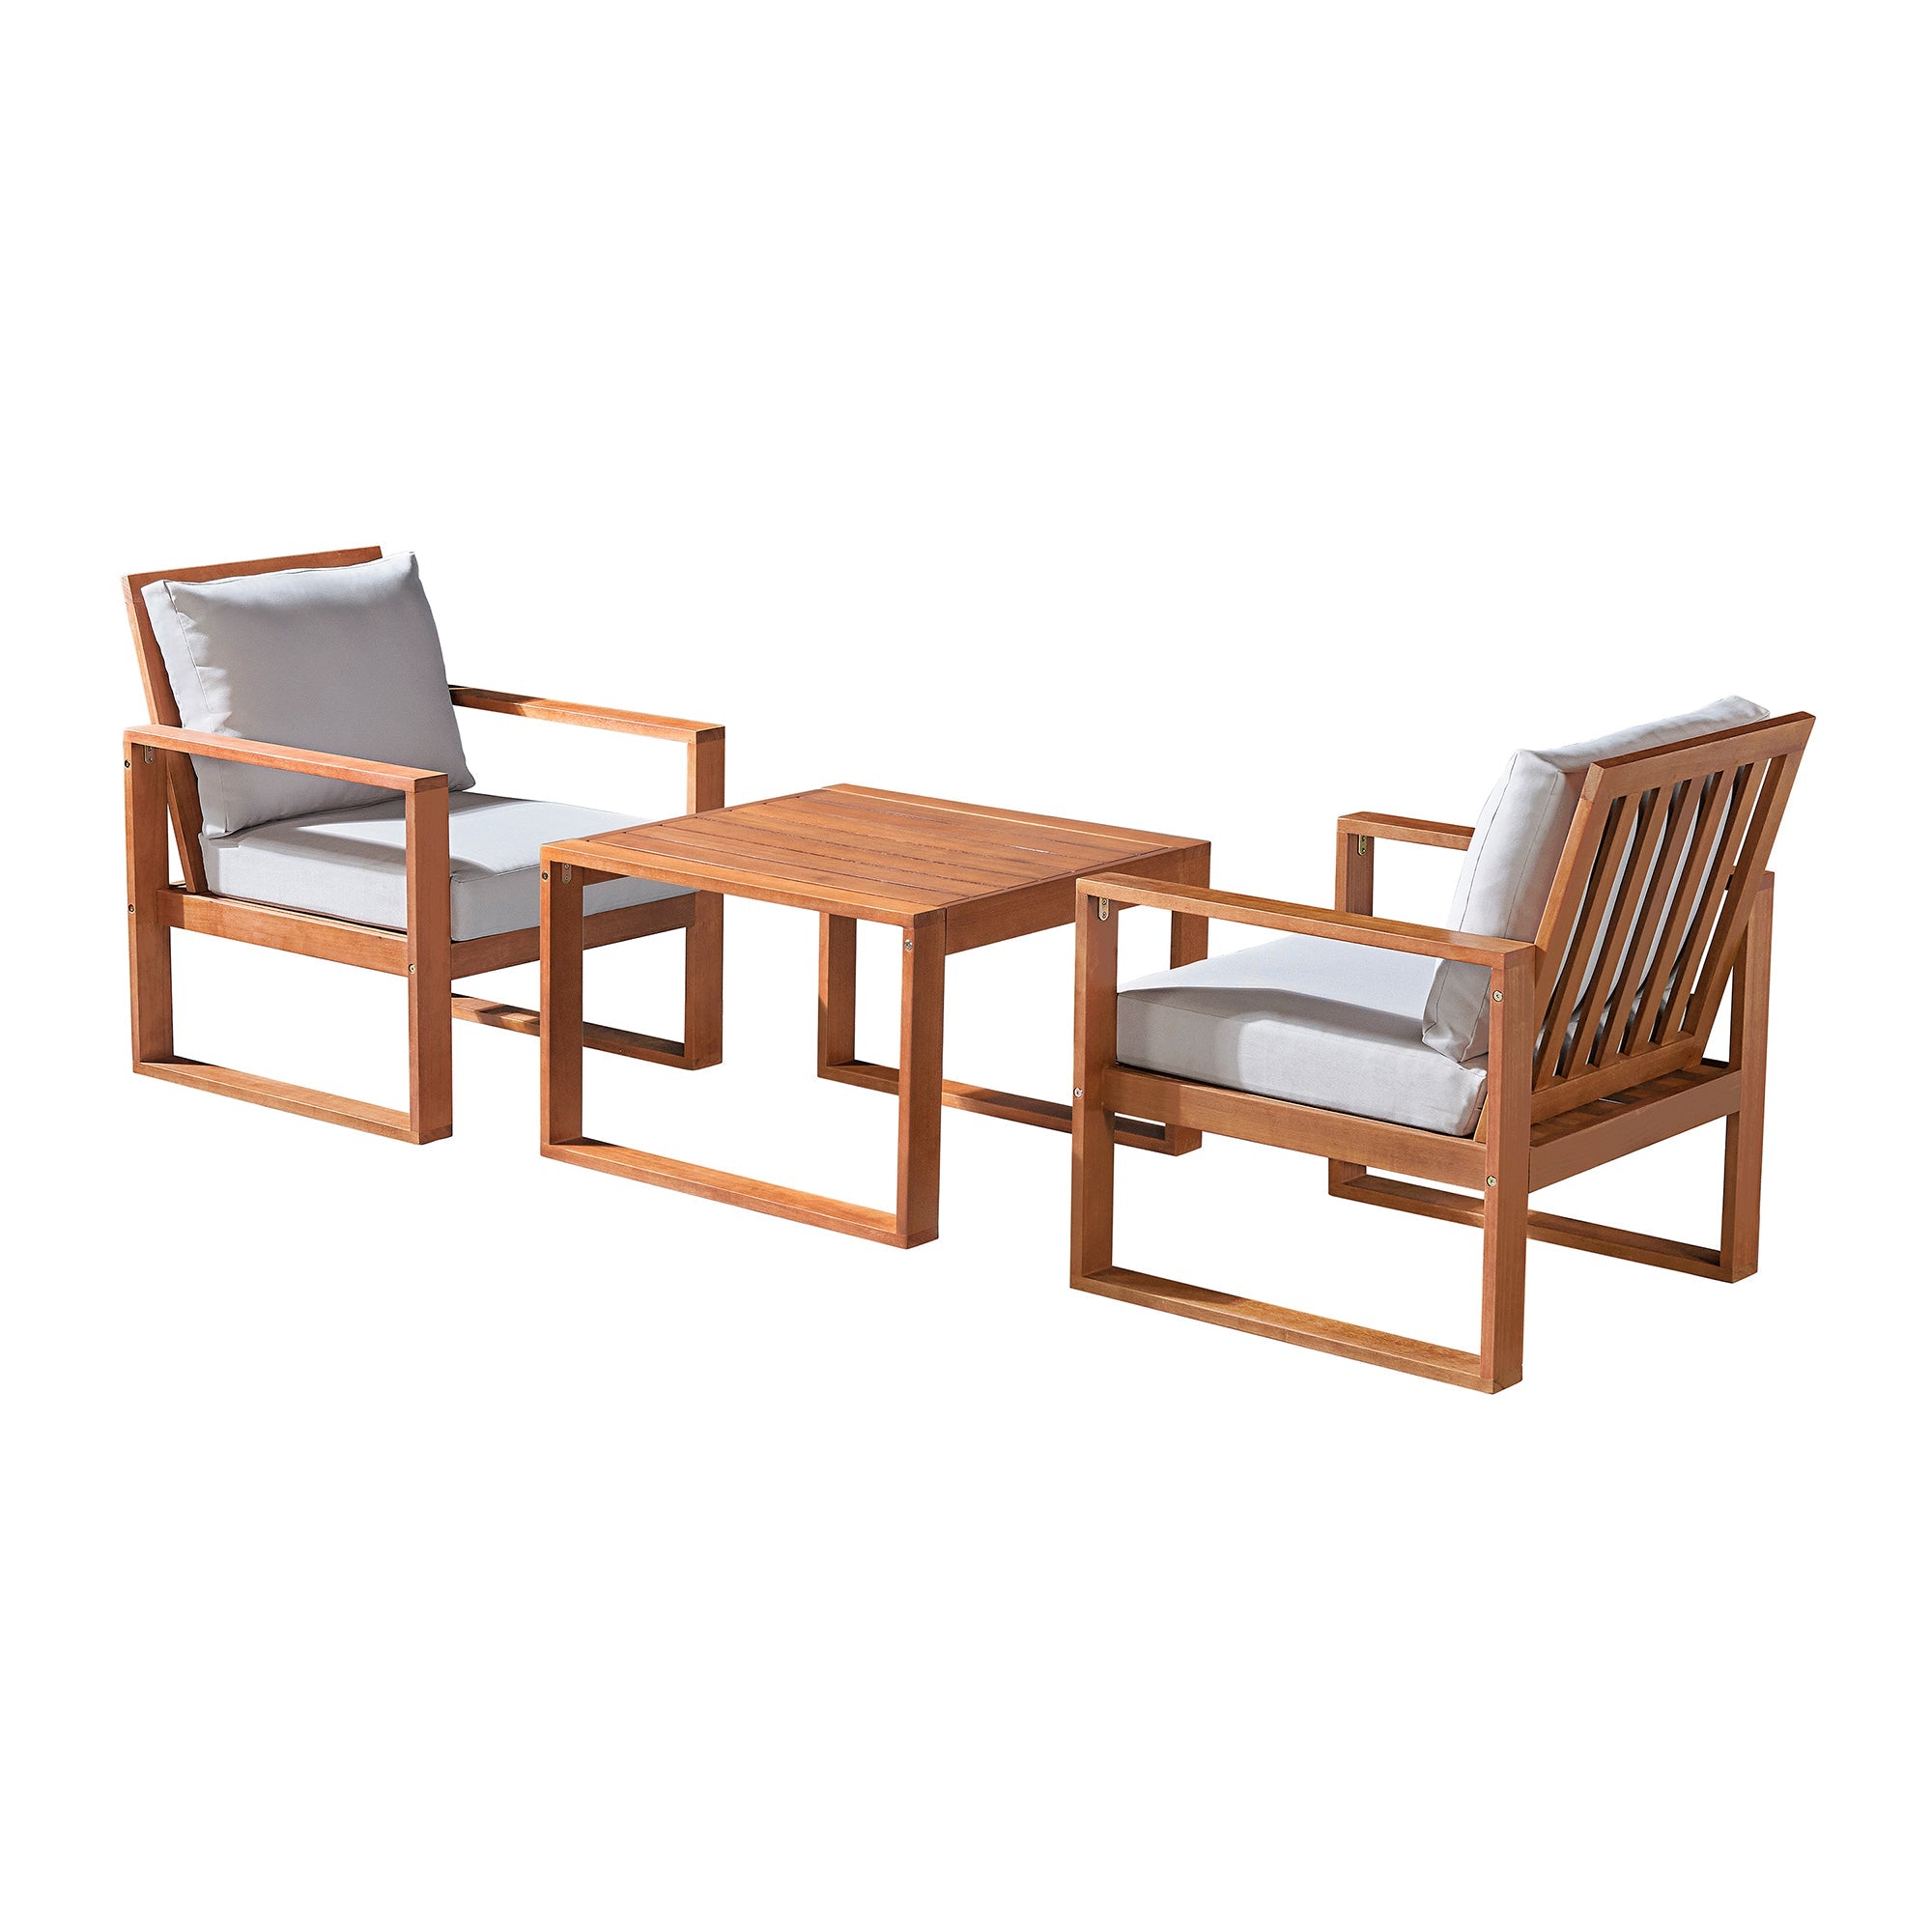 Natural-Weston-Eucalyptus-Wood-3-piece-Conversation-Set-with-a-Set-of-2-Chairs-and-Cocktail-Table-Outdoor-Seating